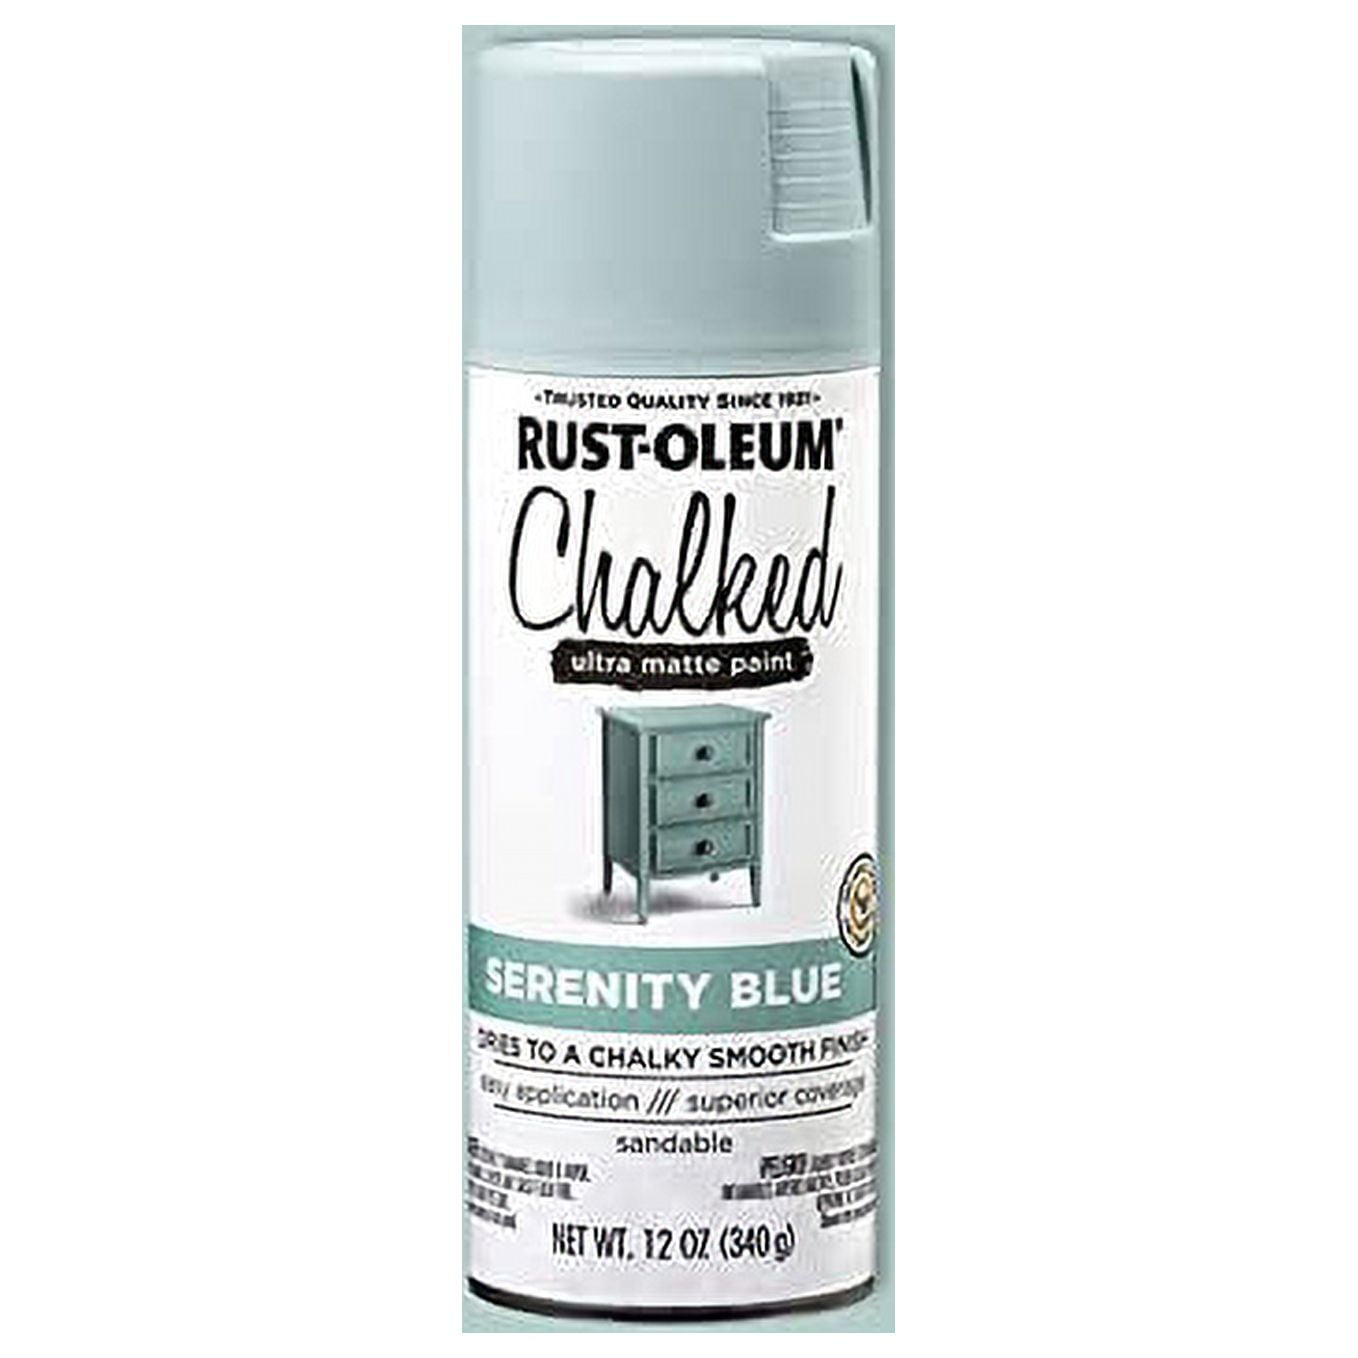 Rust-Oleum Specialty 11 oz. Blue Cosmos Color Shift Spray Paint (Case of 6)